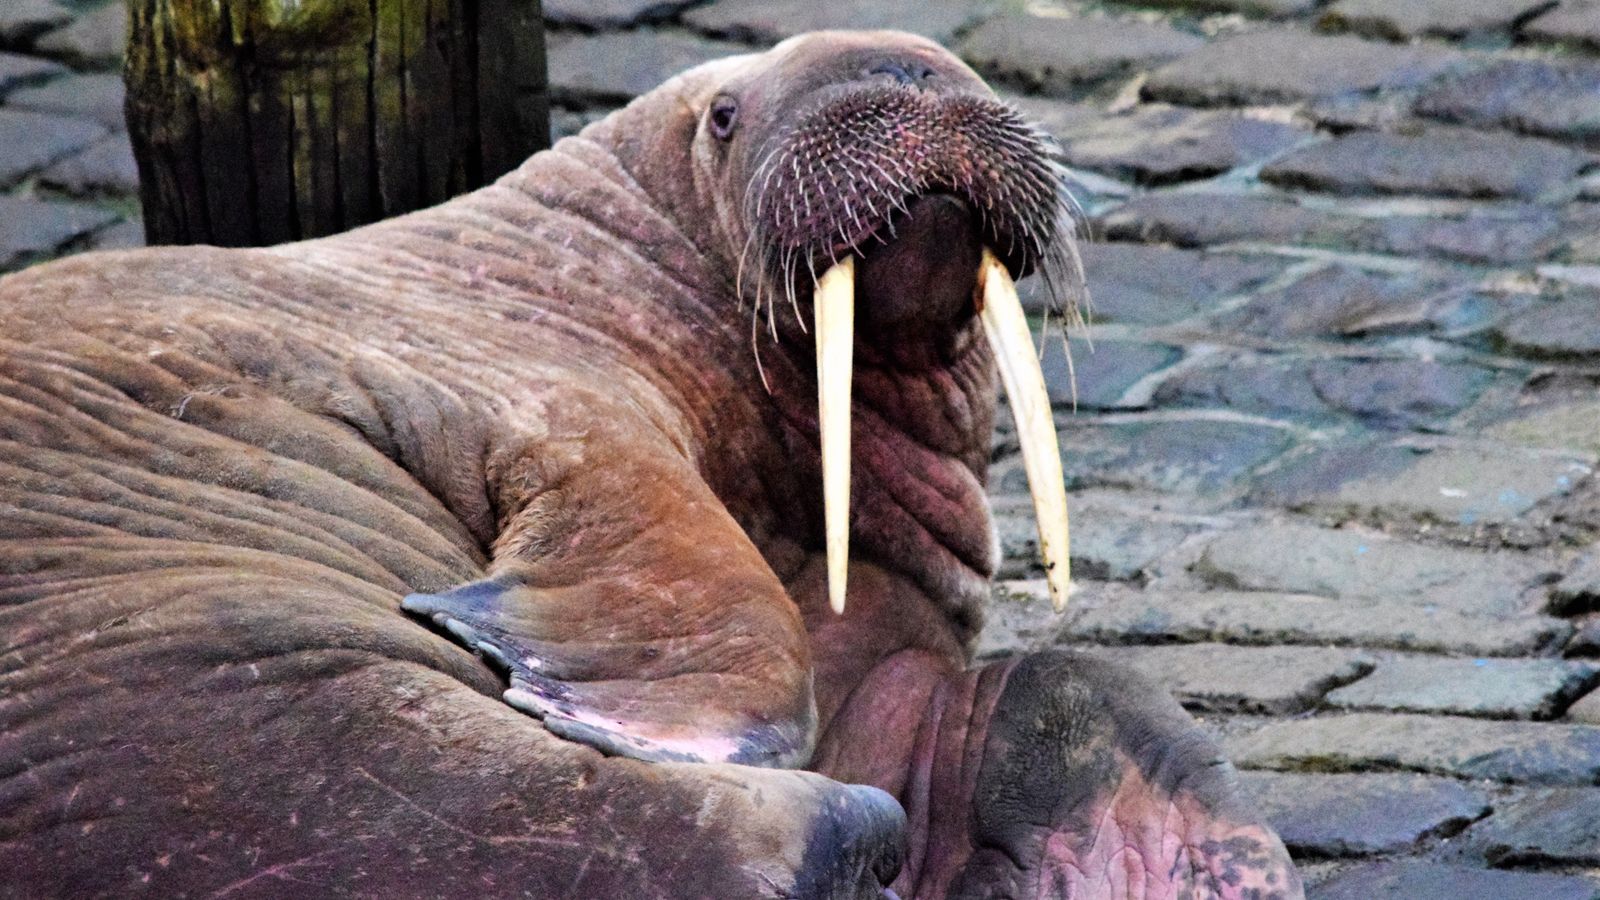 The walrus, believed to be Thor, arrived in Scarbrough on Friday. Pic: Stuart Ford/PA